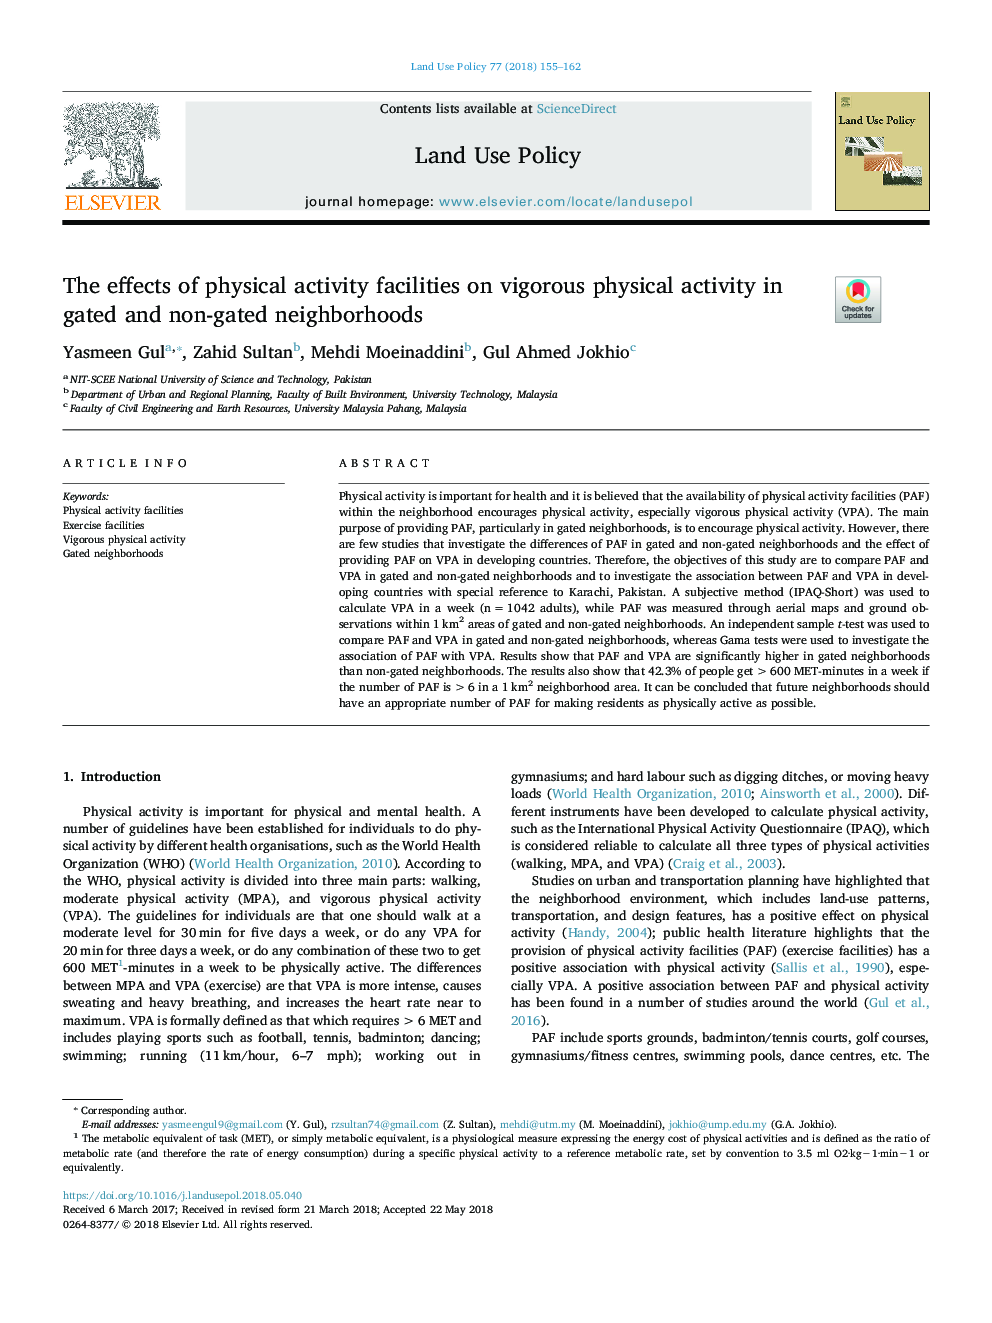 The effects of physical activity facilities on vigorous physical activity in gated and non-gated neighborhoods